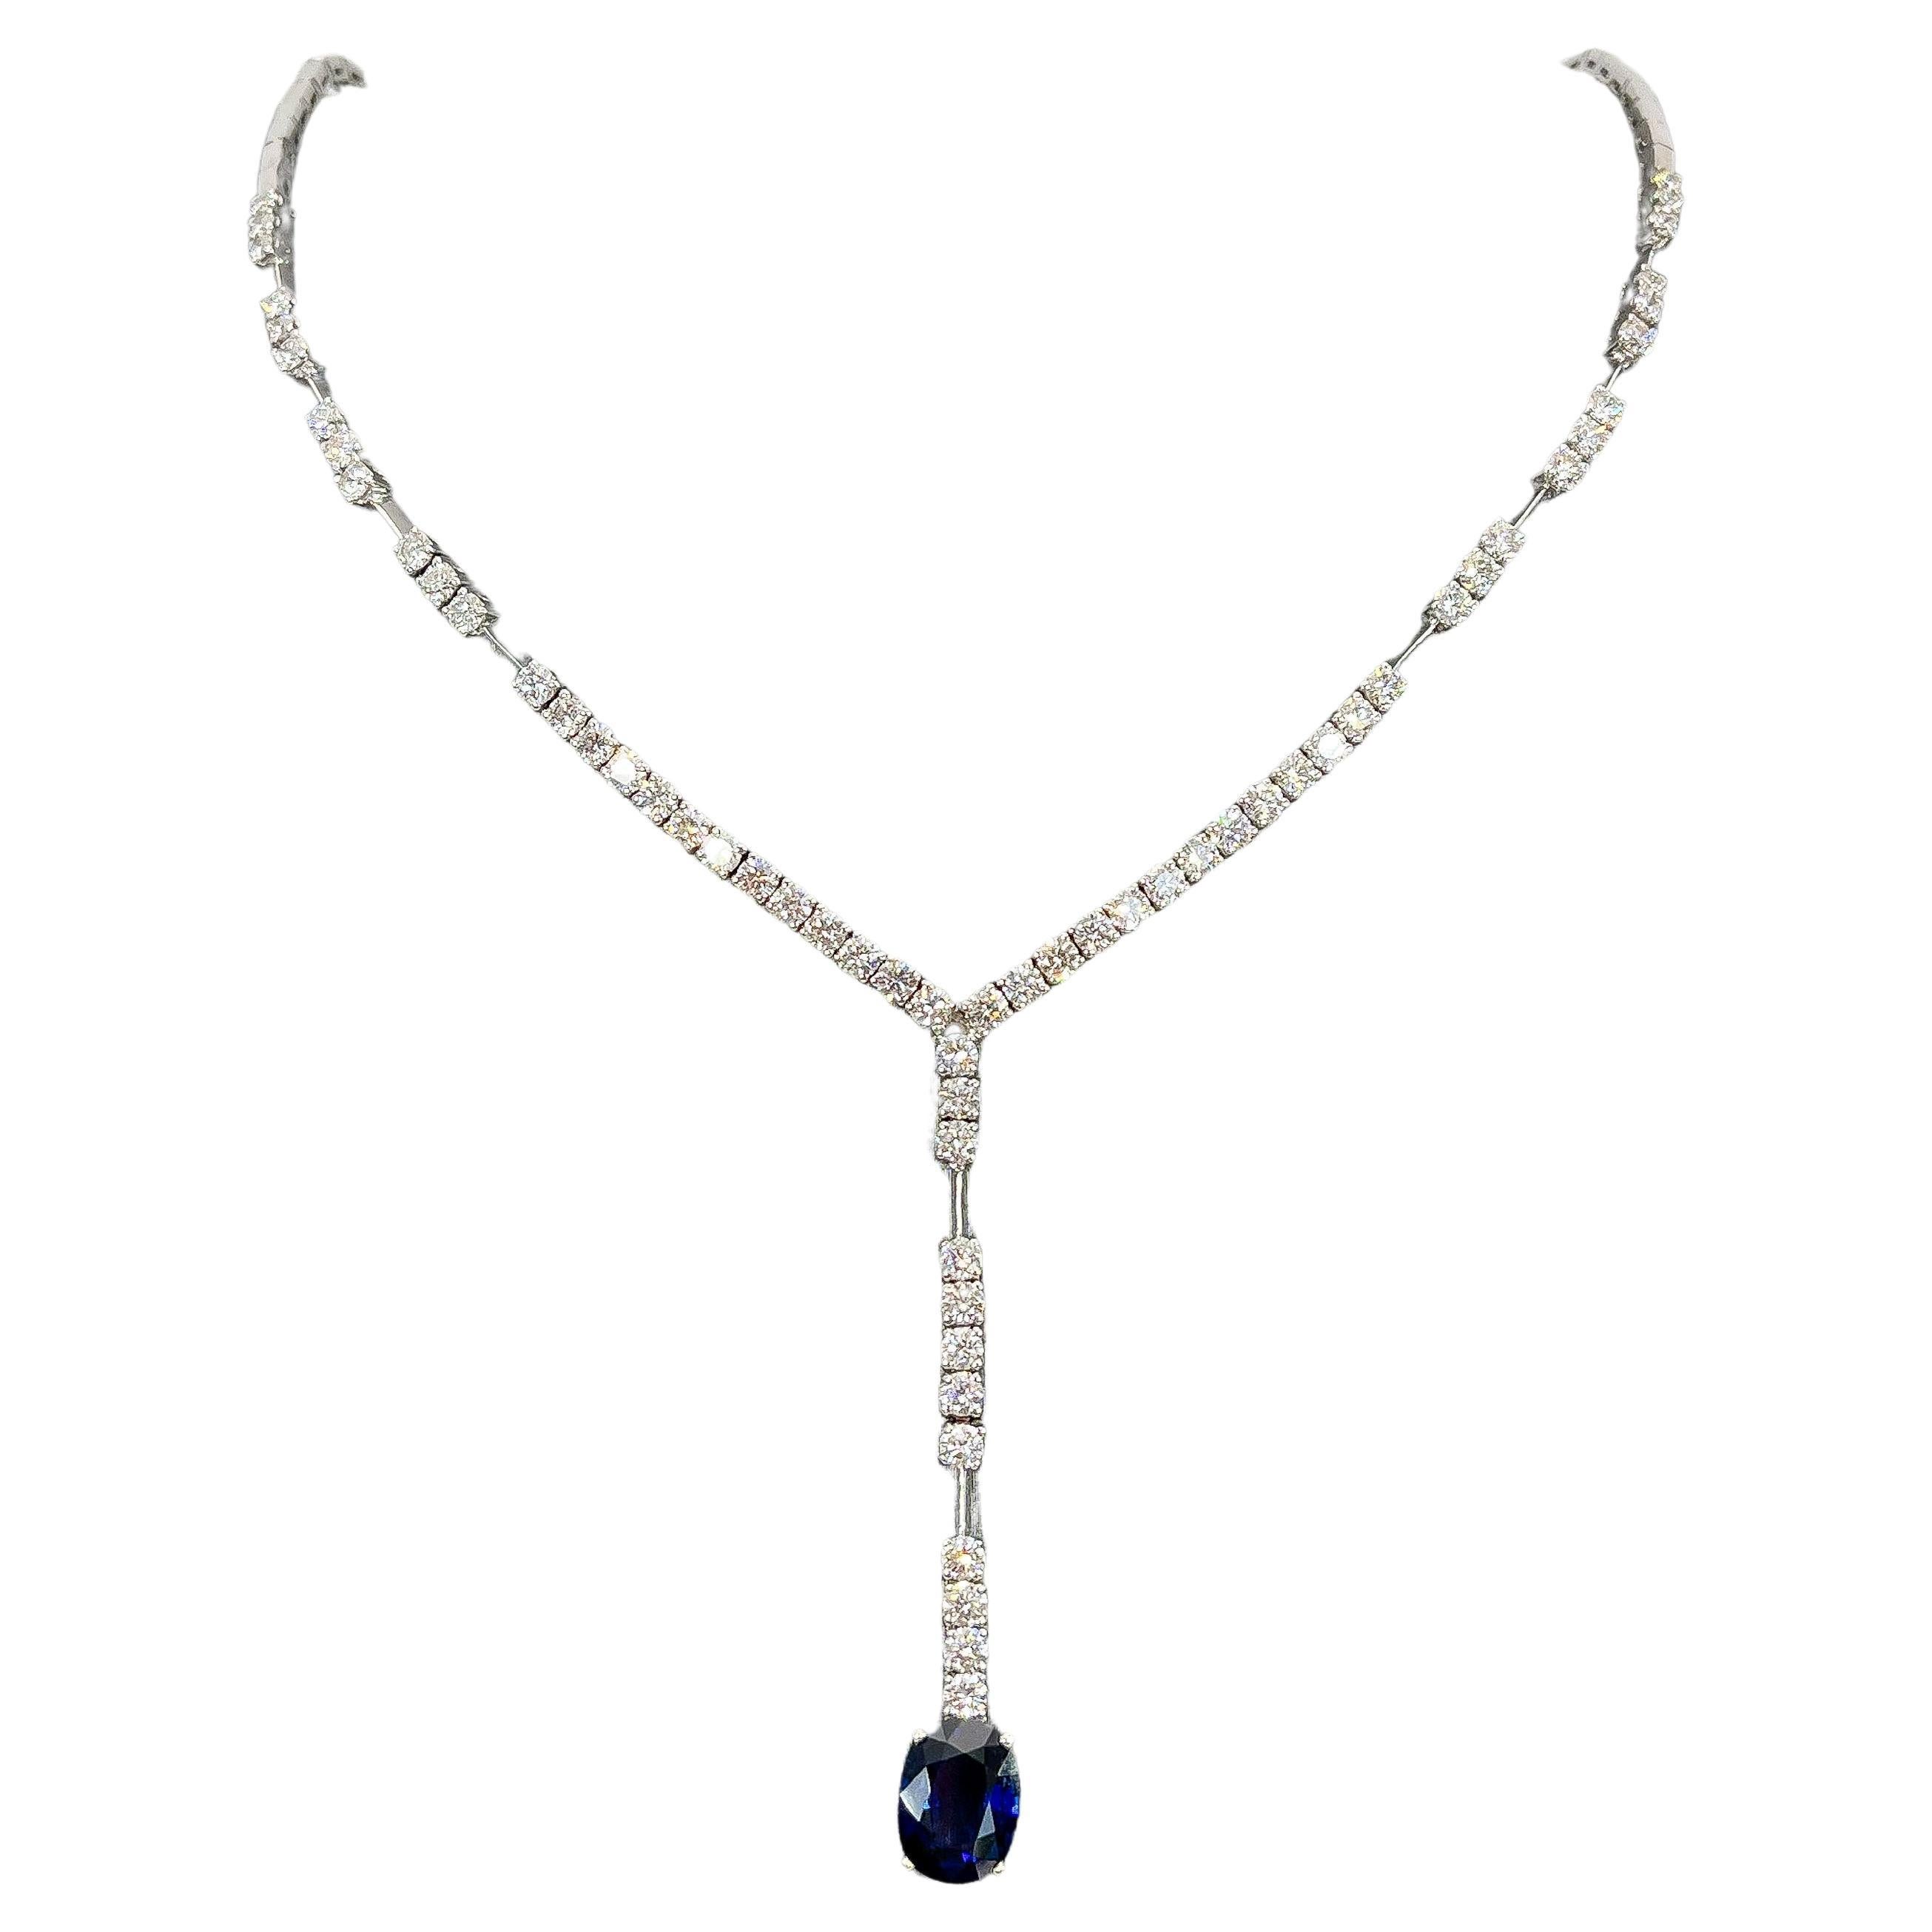 18K White Gold 3.32 CT Sapphire and 7 CTW Diamond "Y" Necklace For Sale